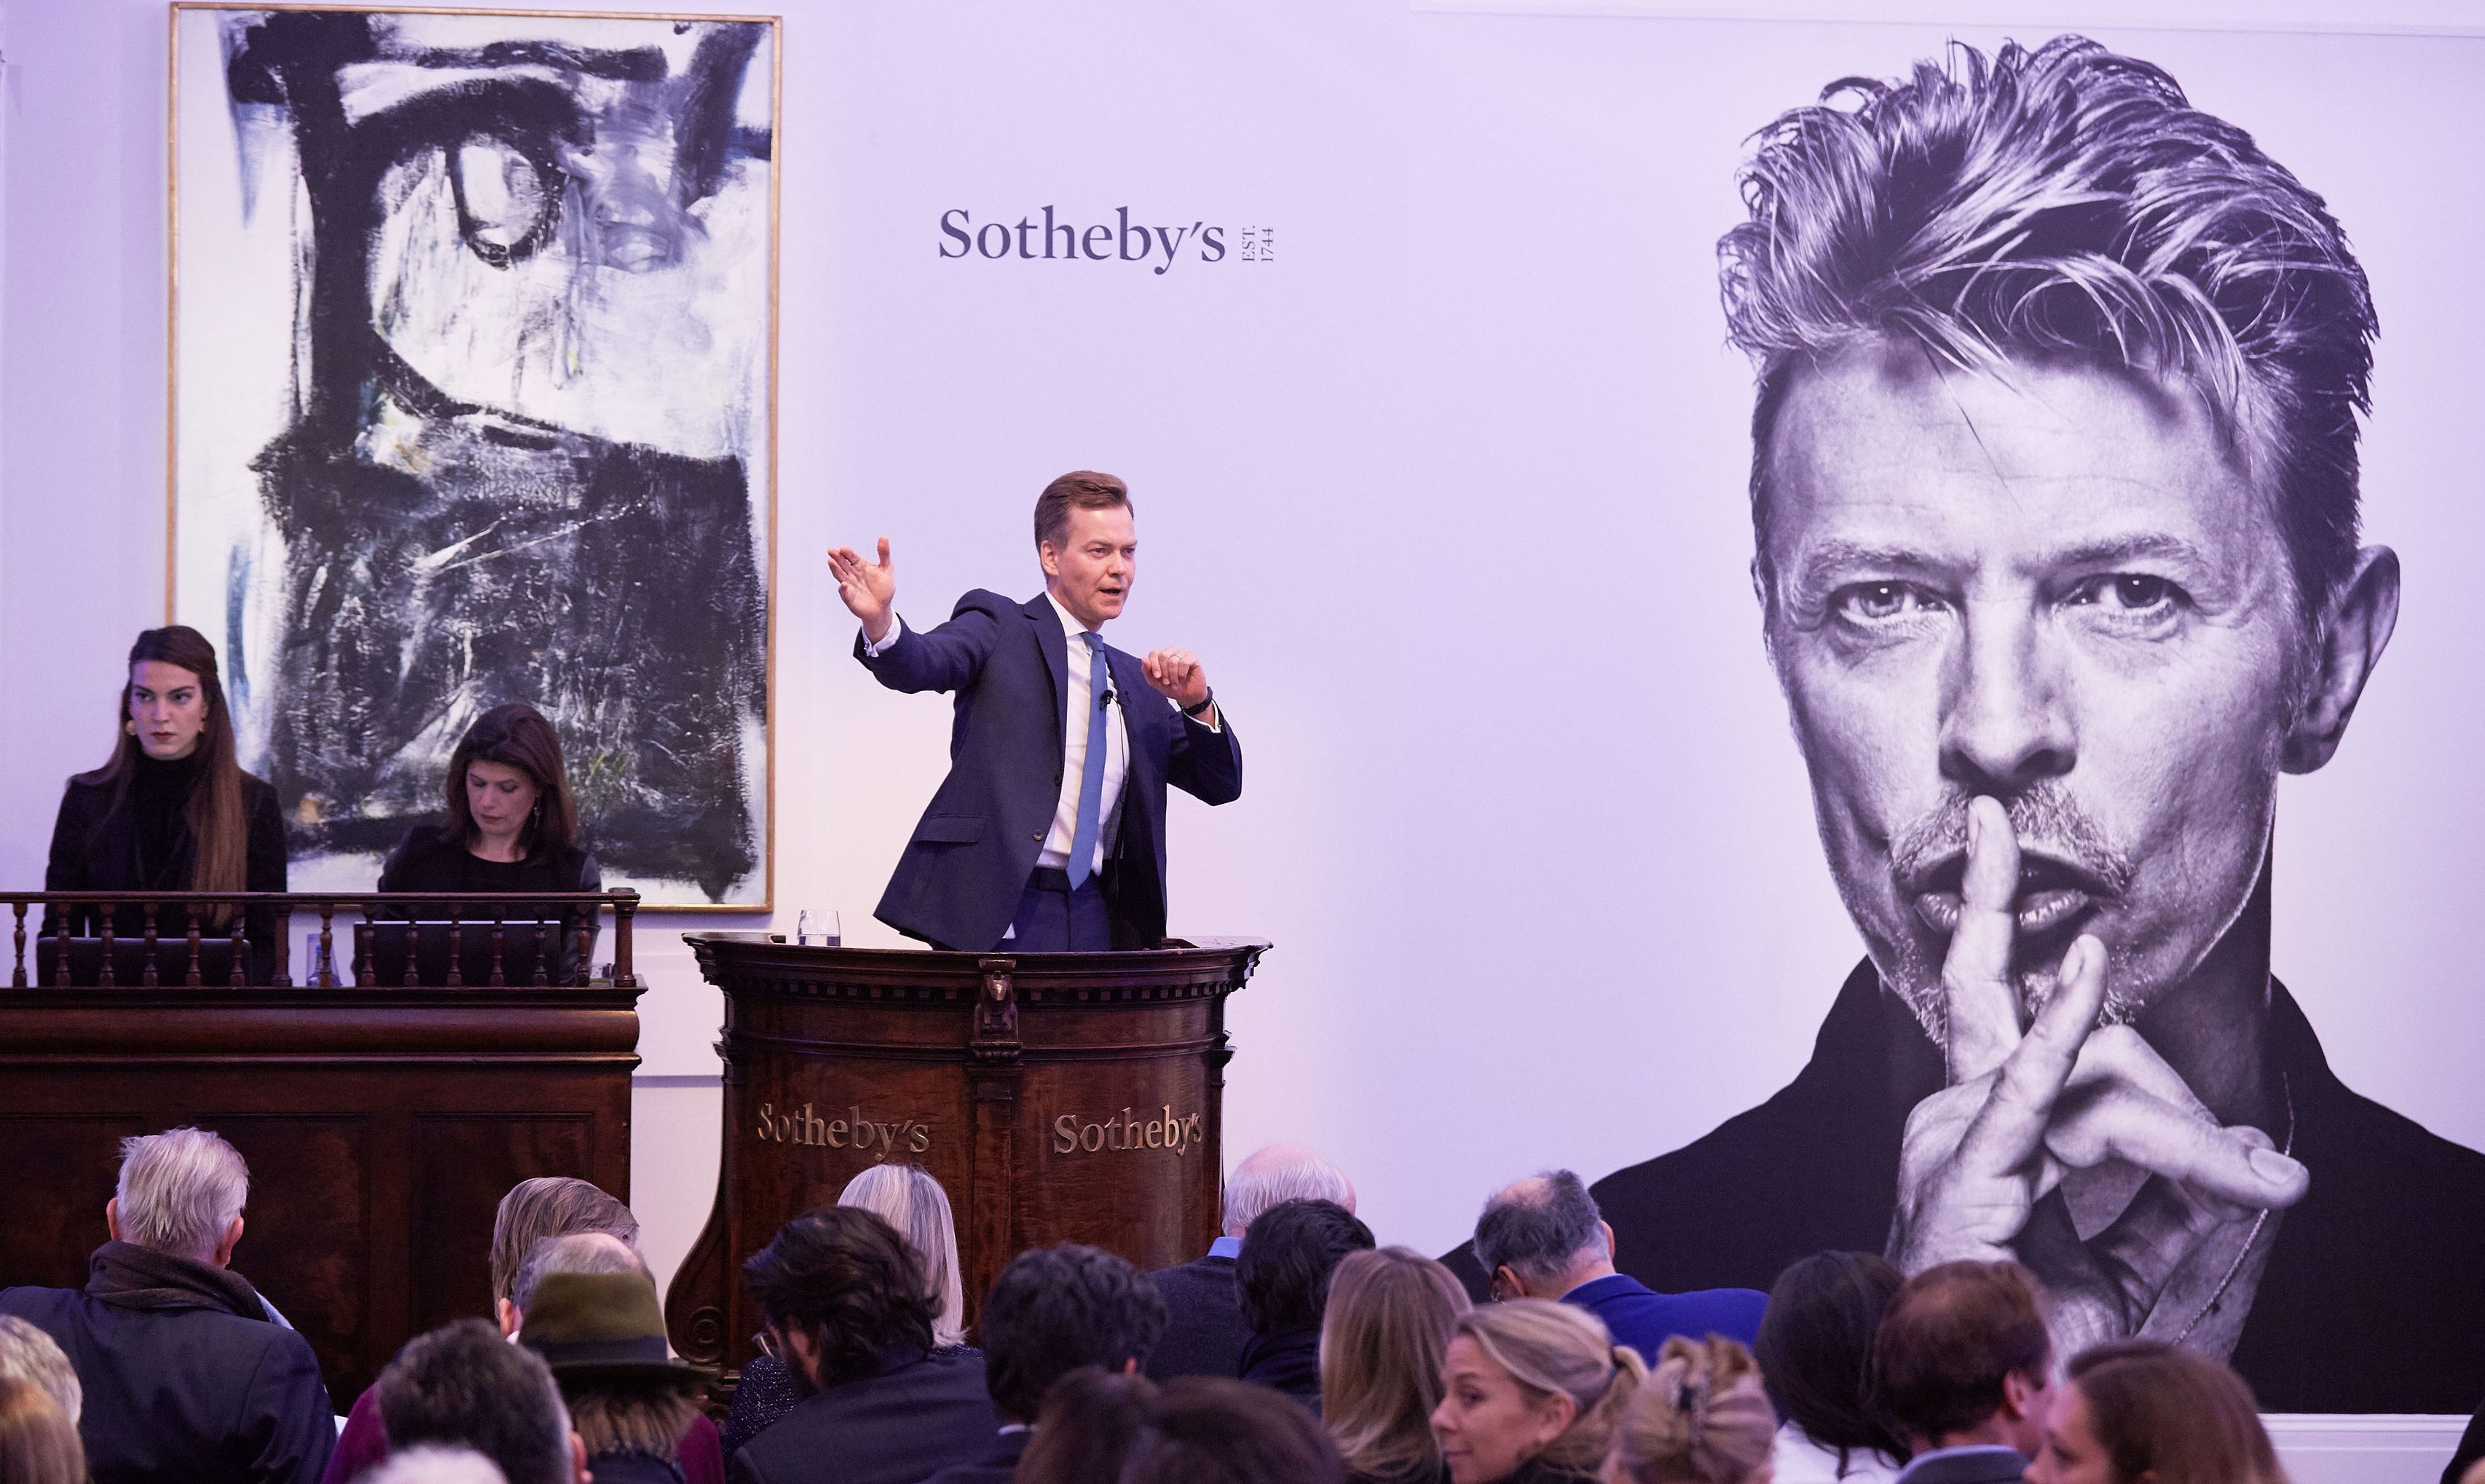 David Bowie's private art collection is being sold at Sotheby's